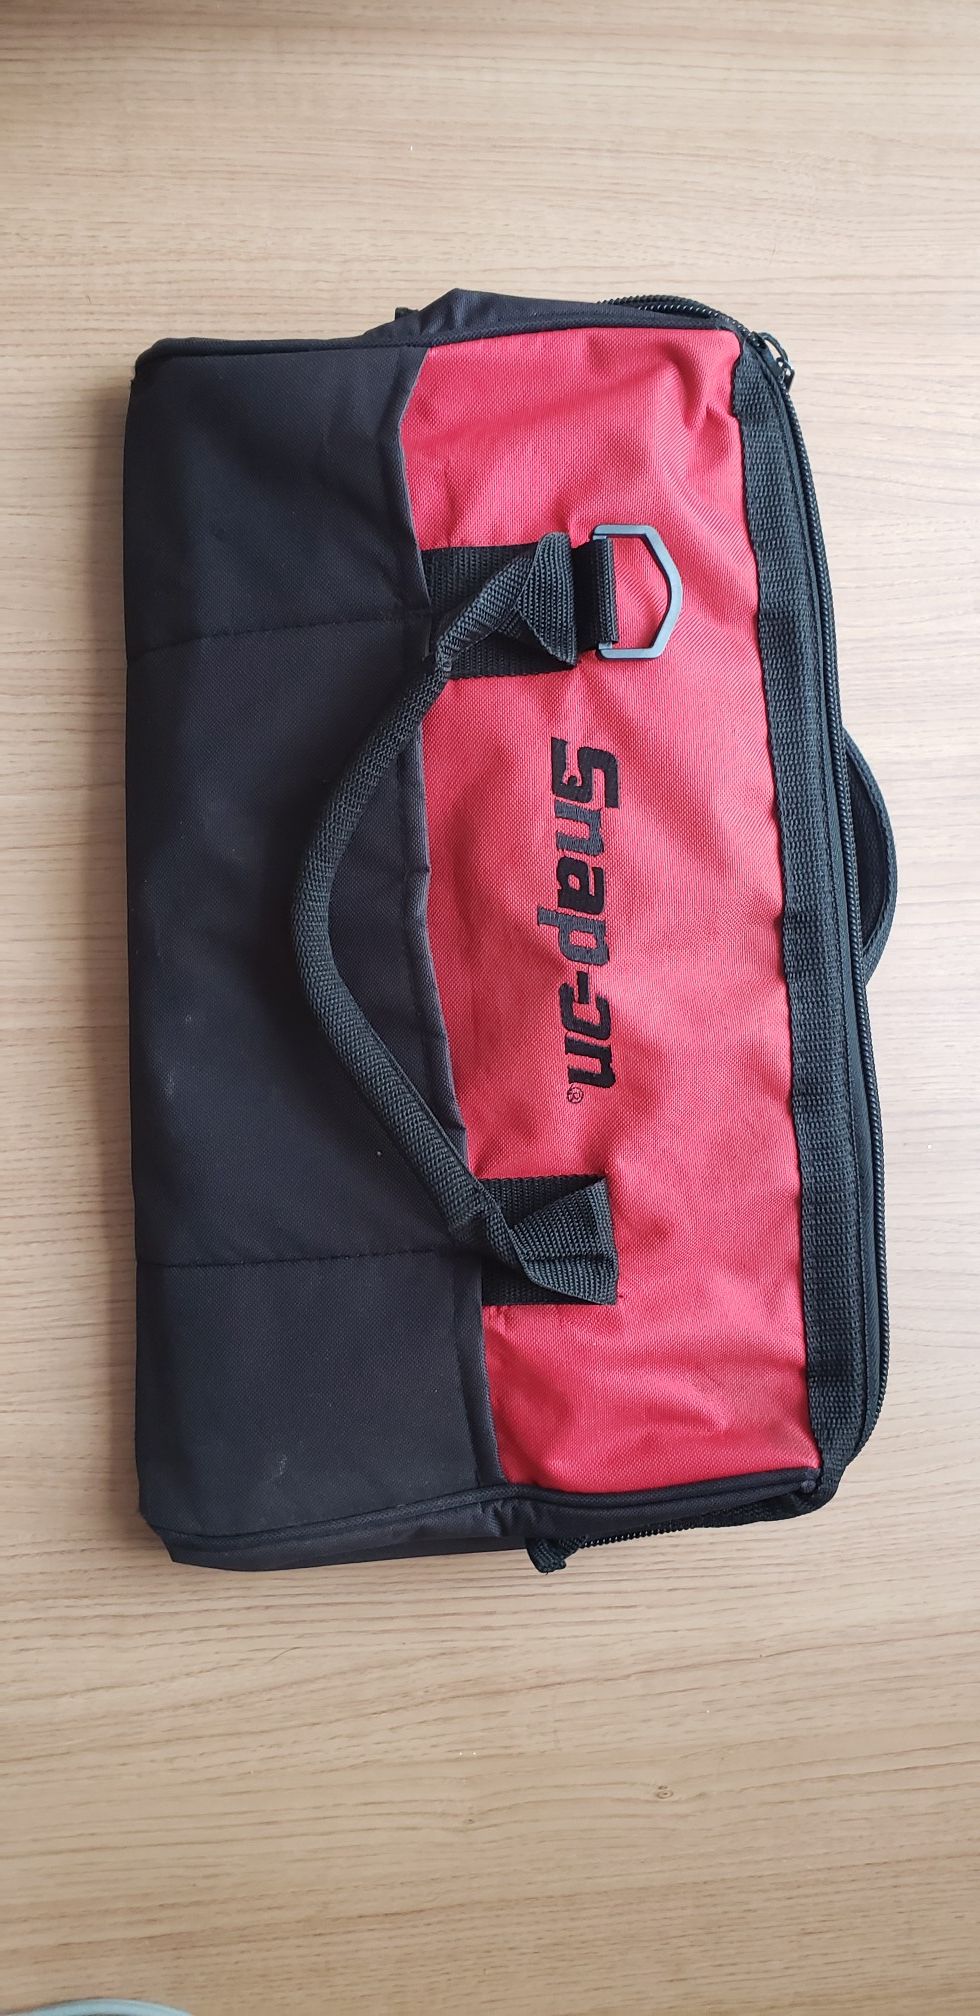 Snap-On Canvas Tool Carrying Storage Bag 18x11x8